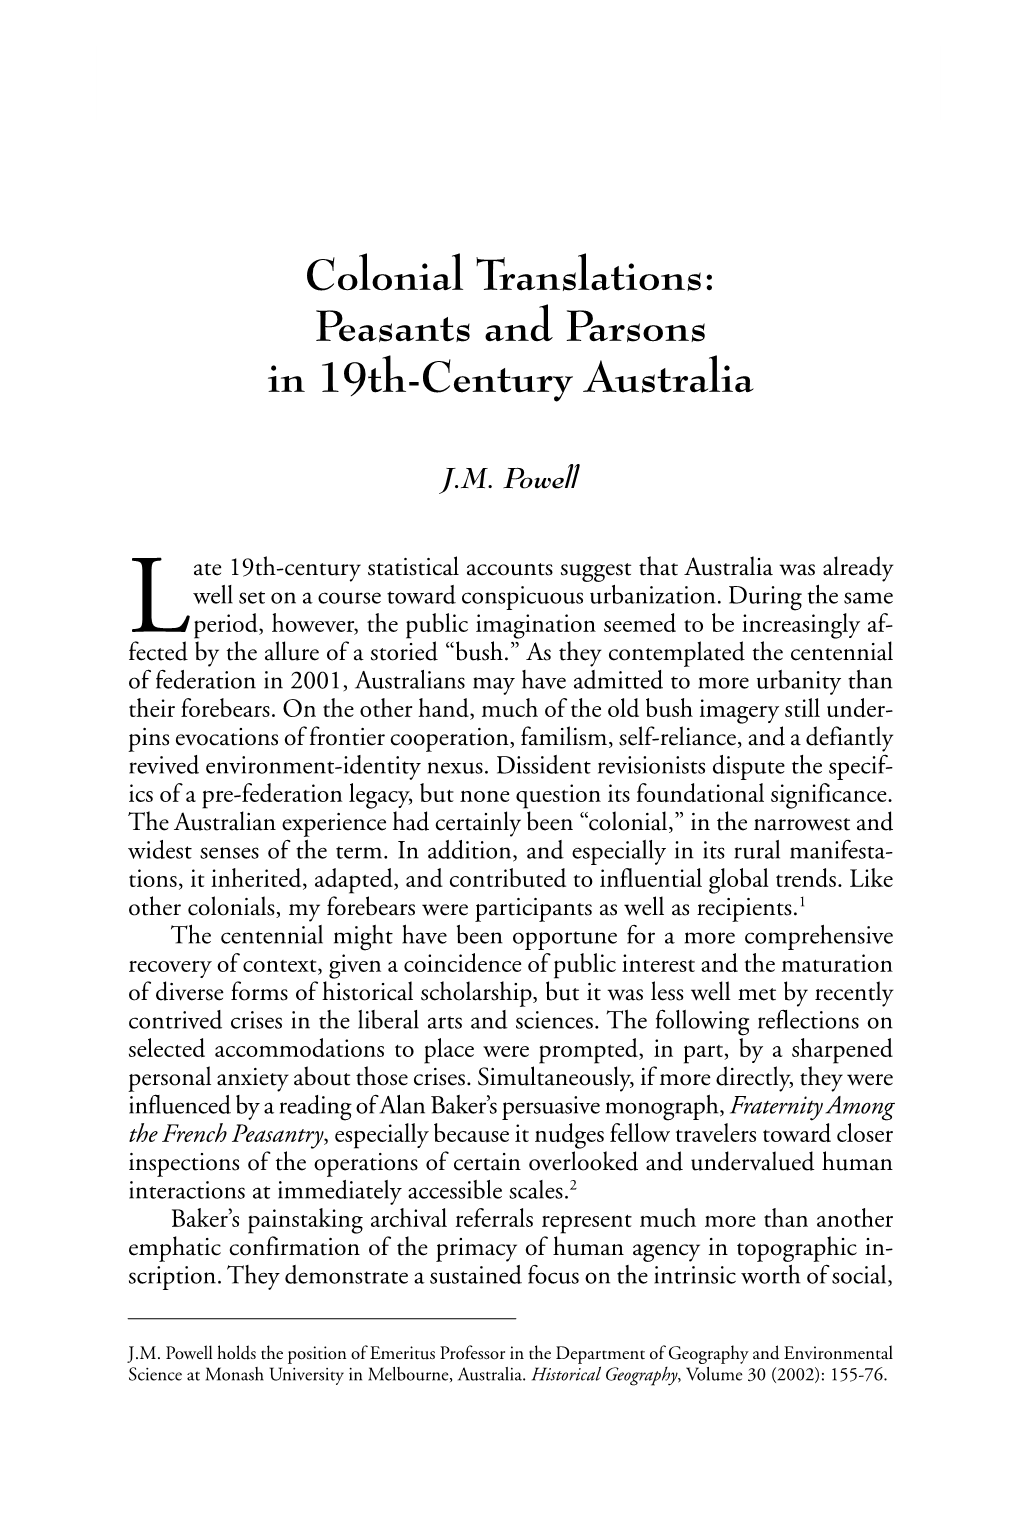 Colonial Translations: Peasants and Parsons in 19Th-Century Australia